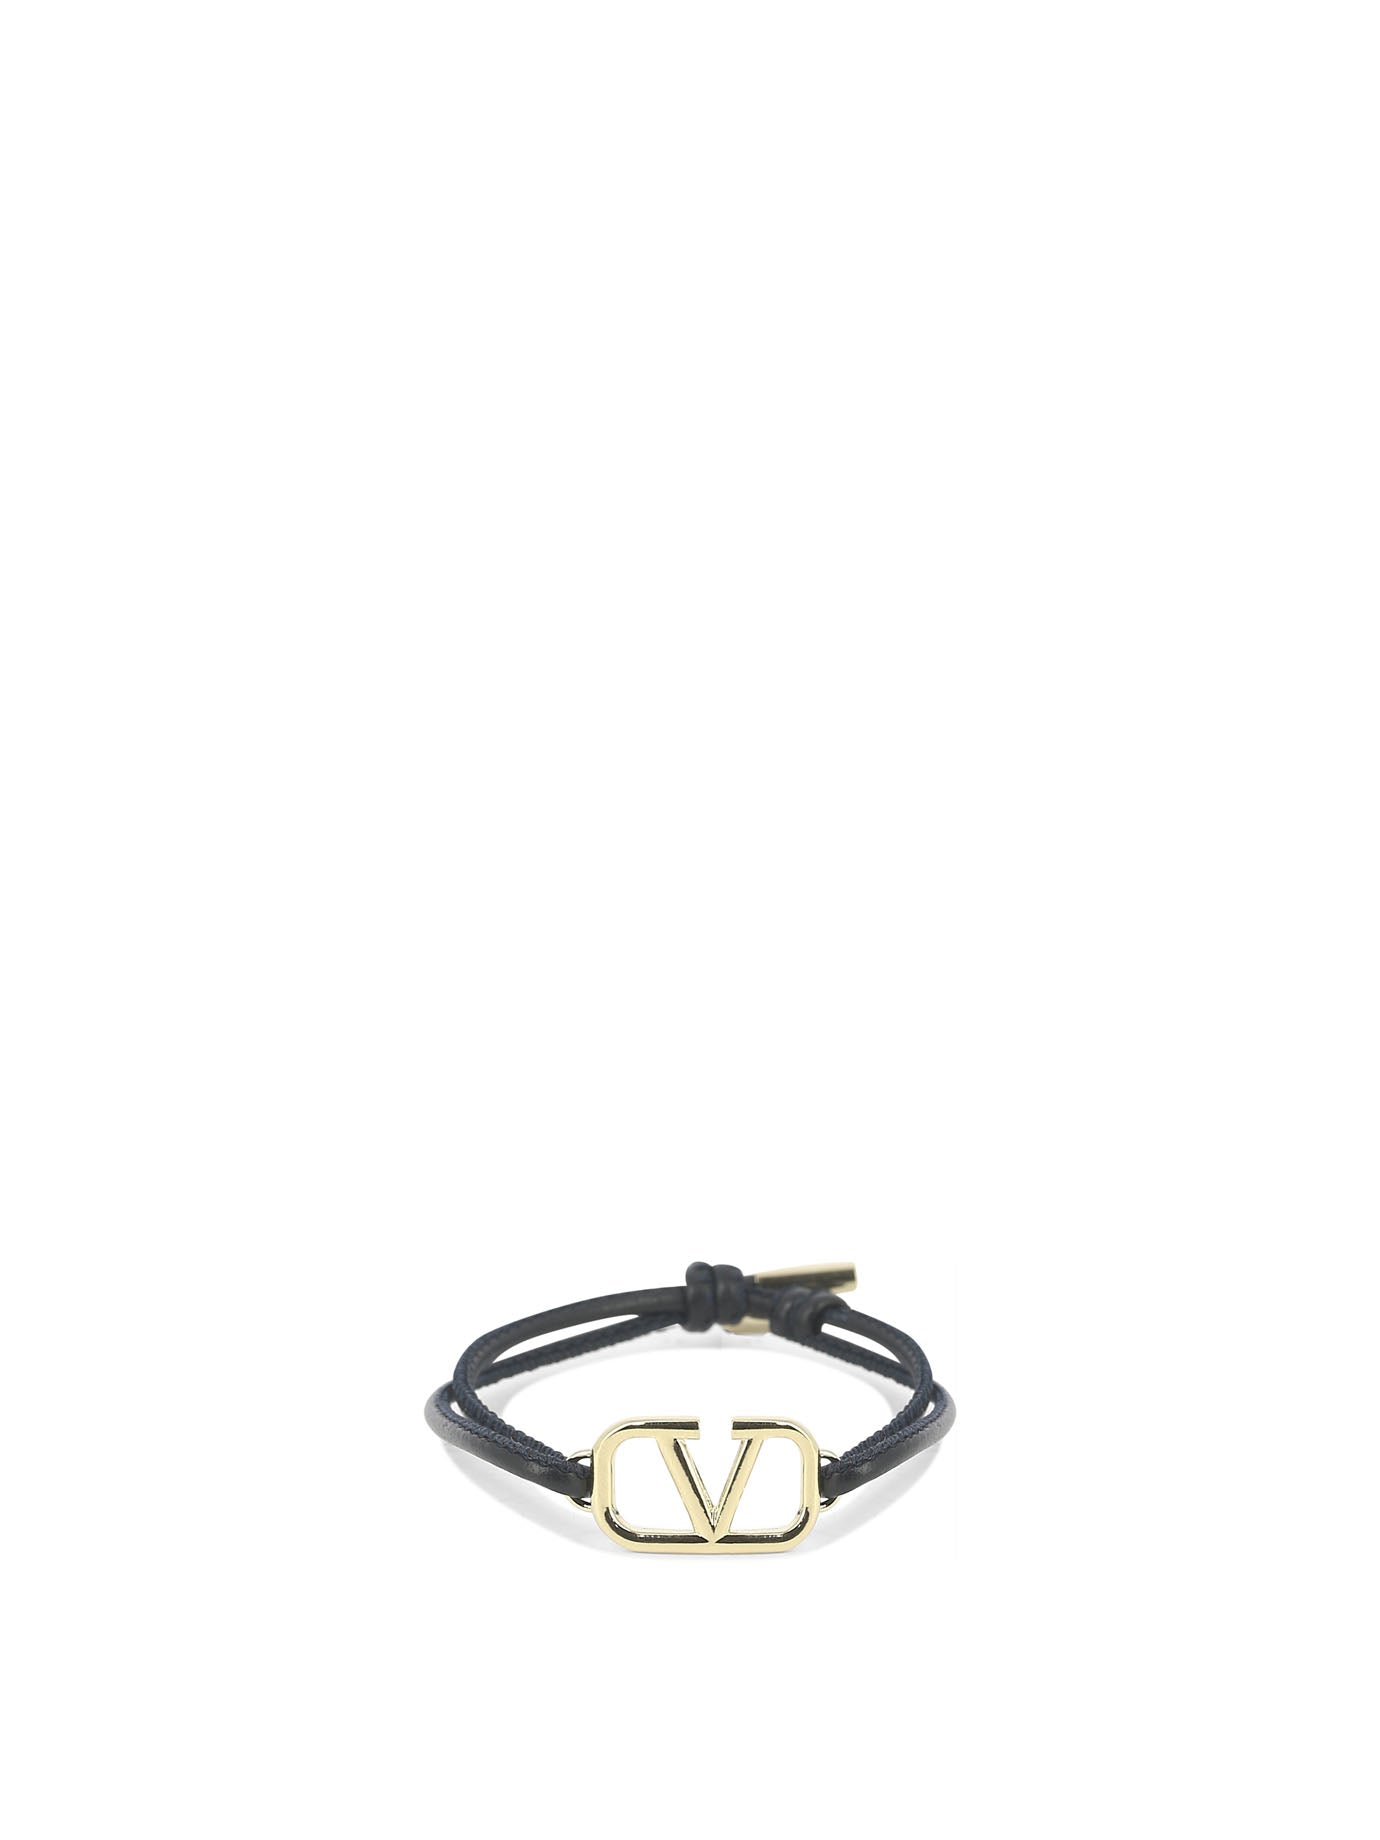 Vlogo Type Metal Cuff for Woman in Gold | Valentino TH